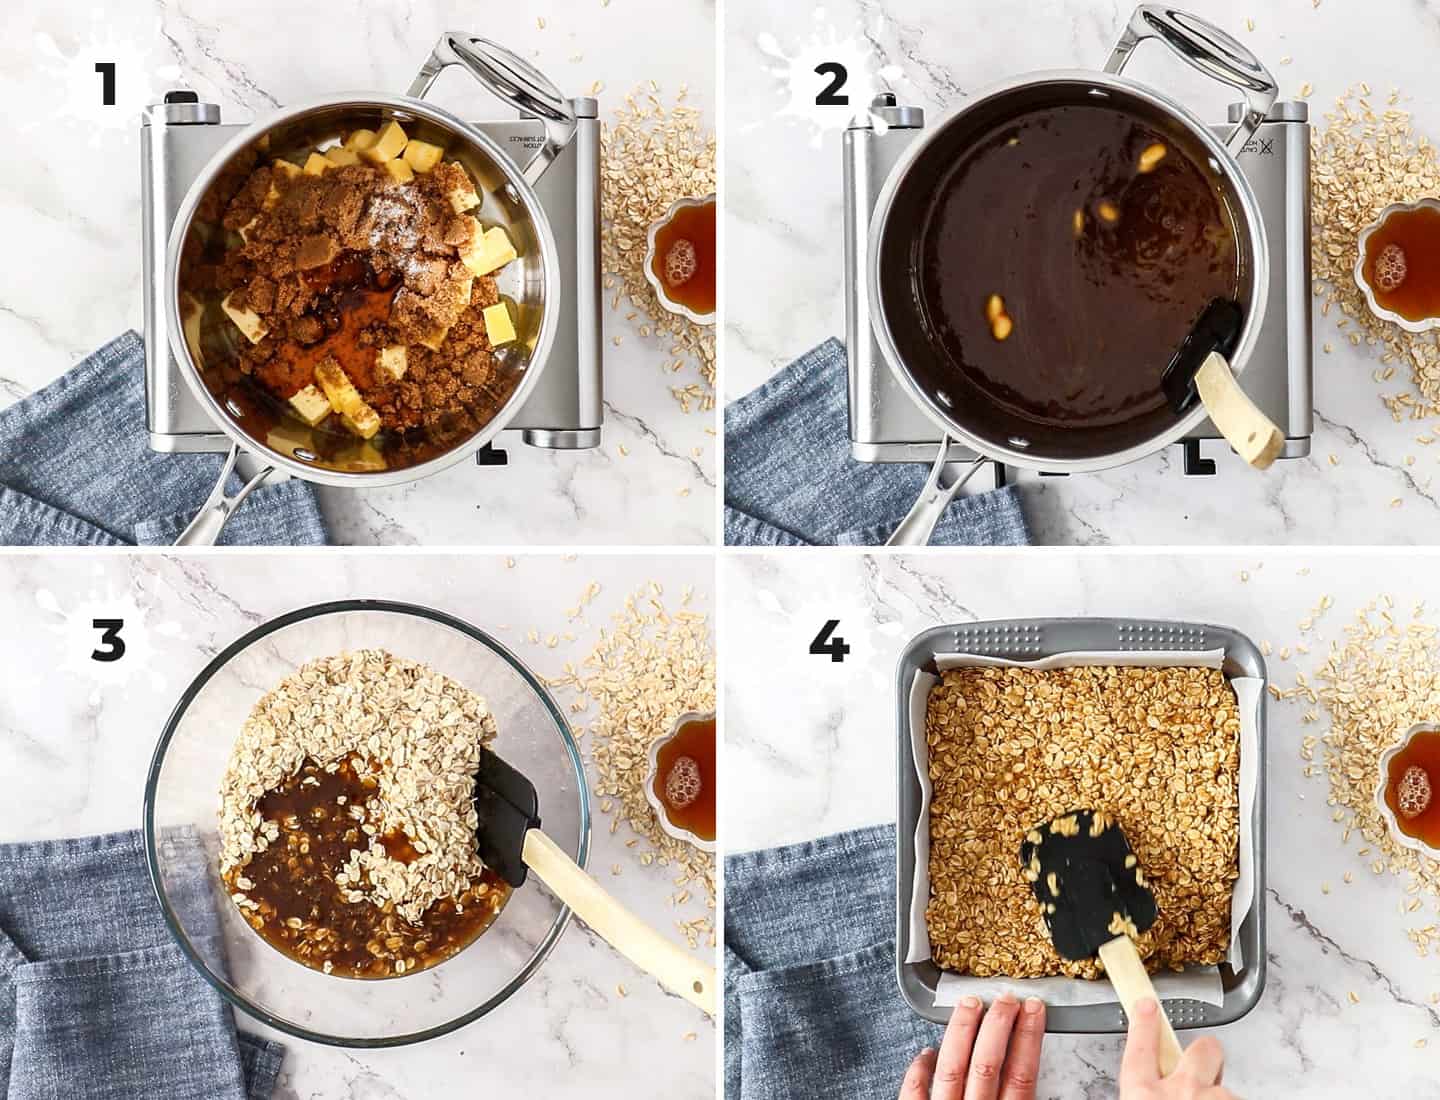 A collage of 4 images showing how to make chocolate flapjacks.